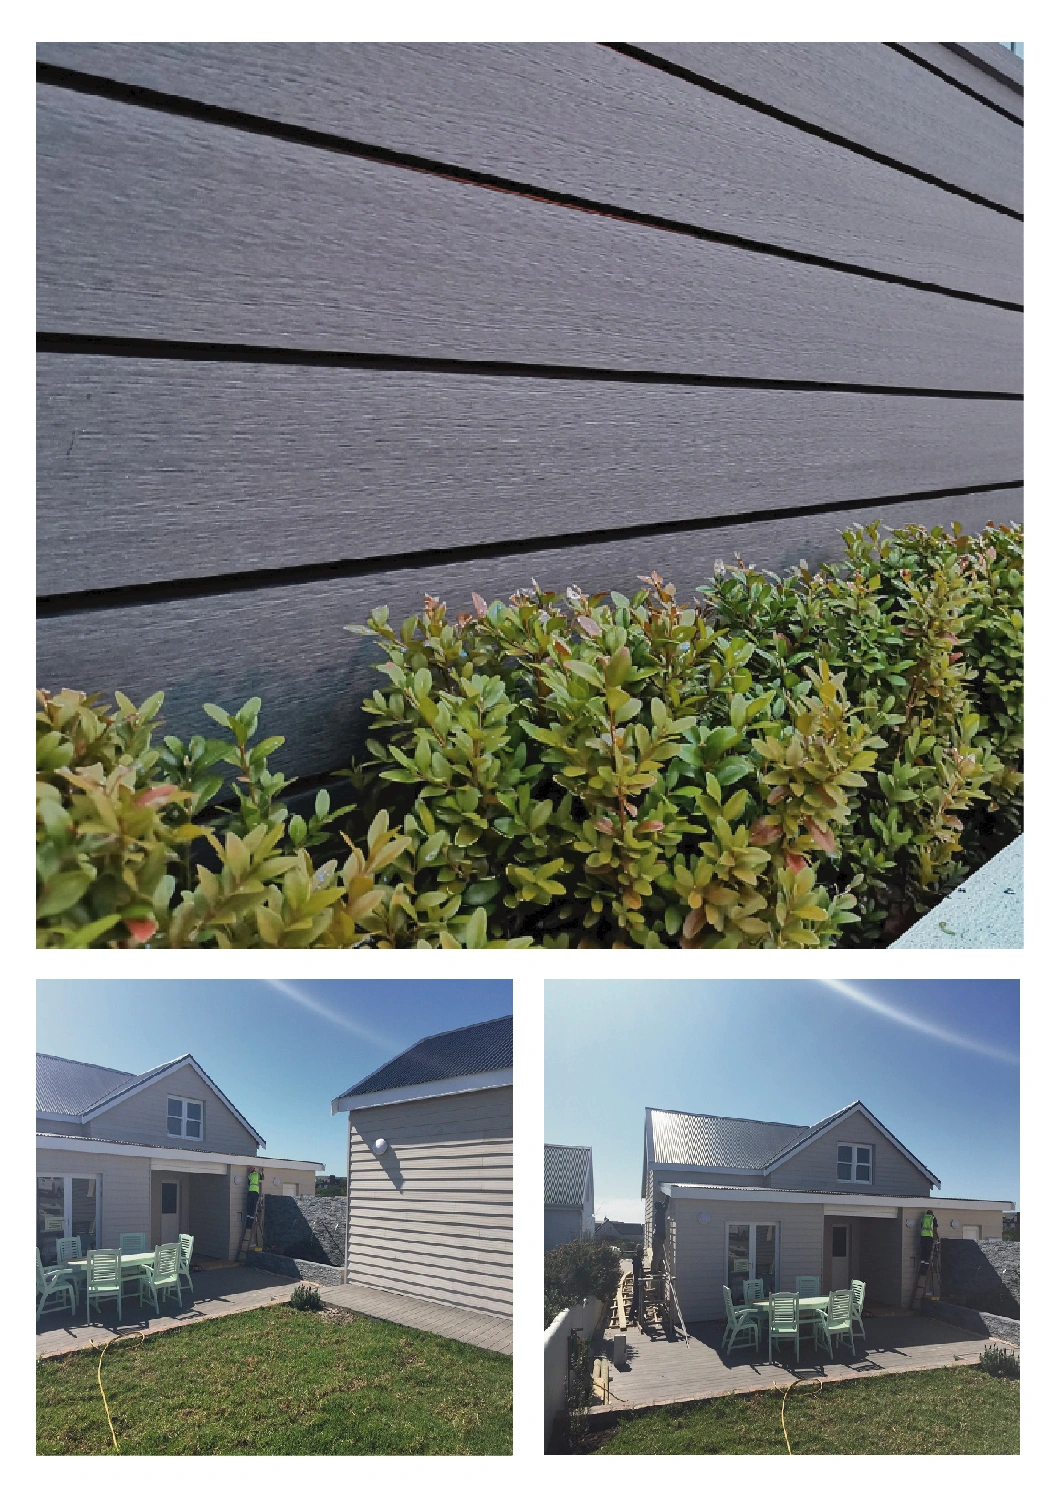 2021 Hot Sales Exterior Garden Screen Wood Plastic Composite Co-Extrusion WPC Material Wall Panel Siding Cladding